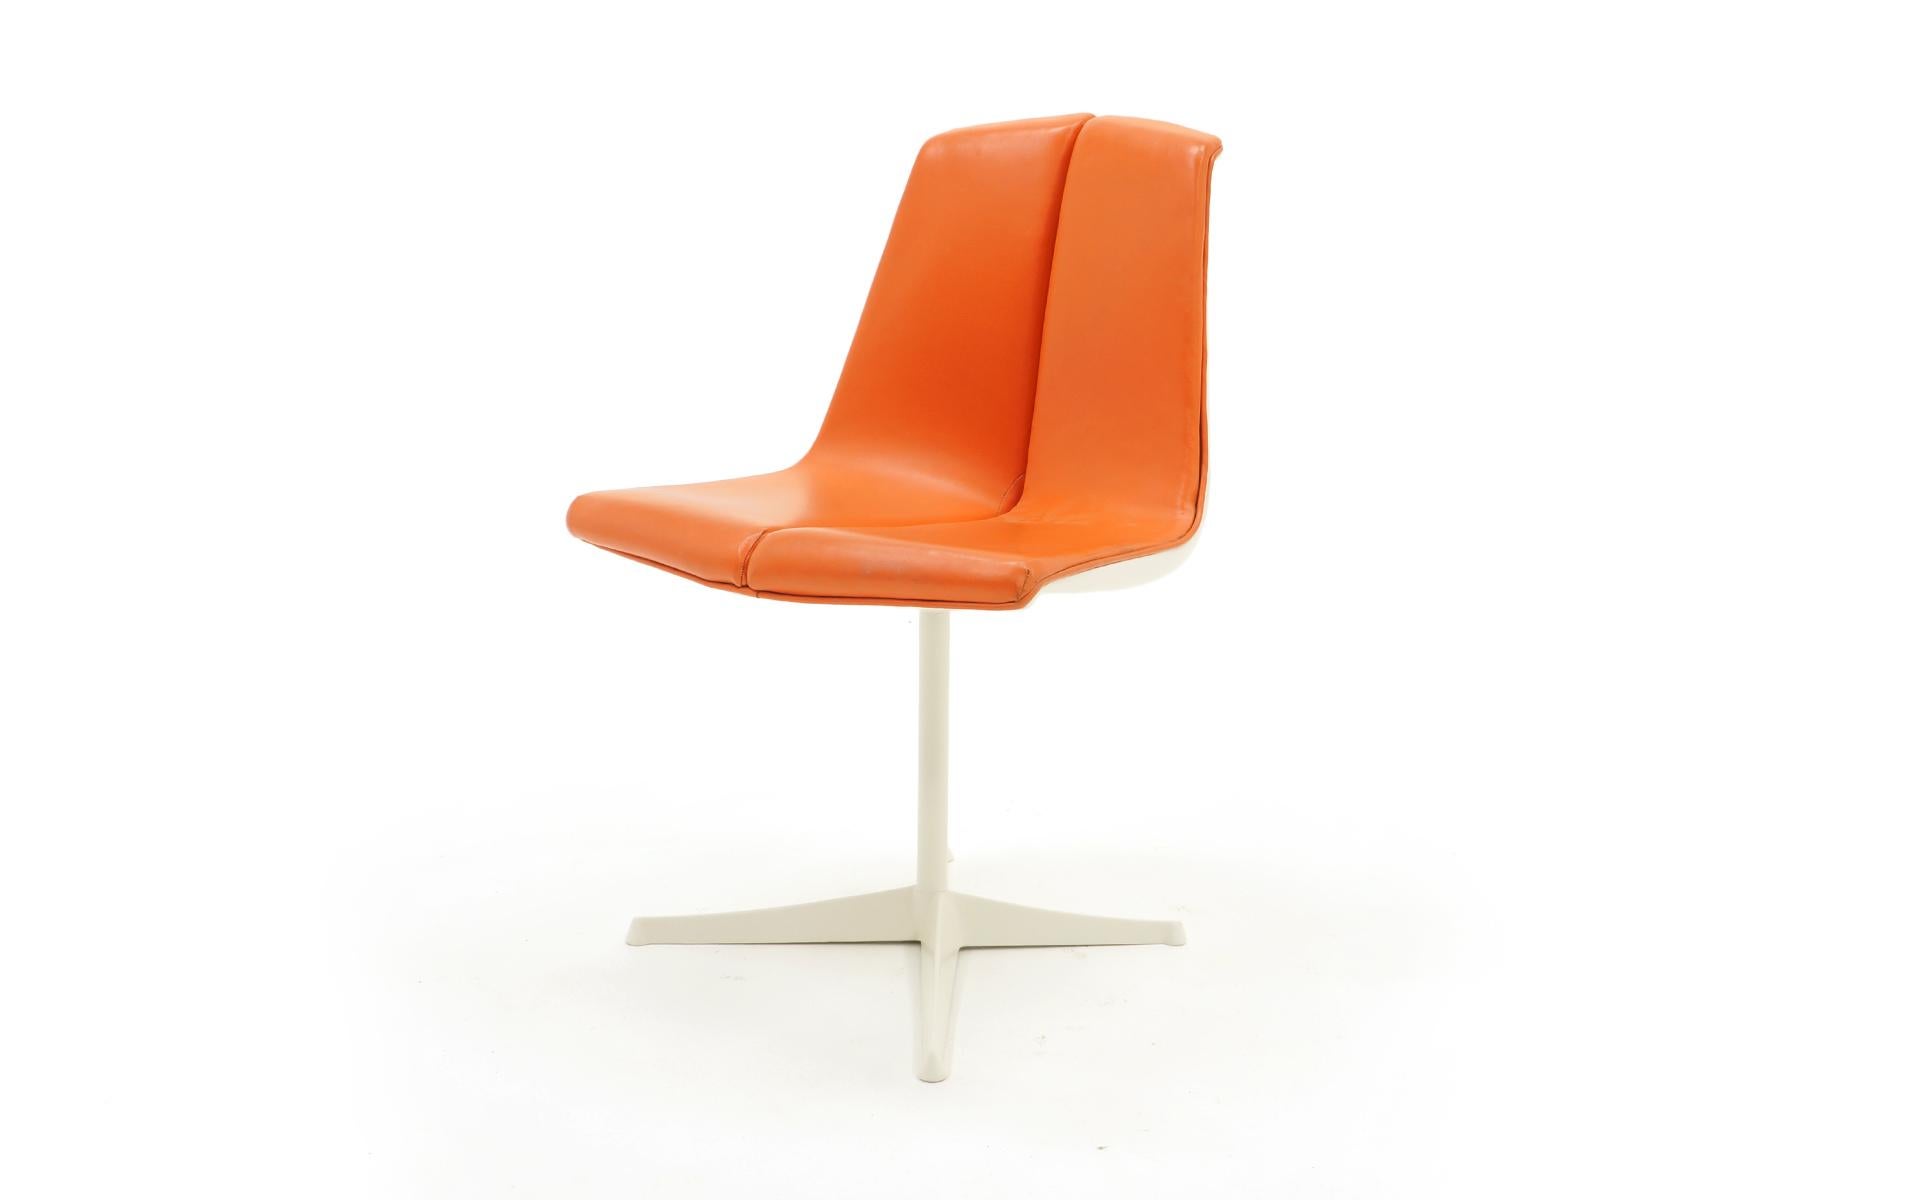 Set of 8 Richard Schultz dining chairs, made by Knoll, 1960s. The frames and seat backs are professionally repainted in a soft white / ivory color and the original red orange seats are in very good condition with very few signs of wear. If you